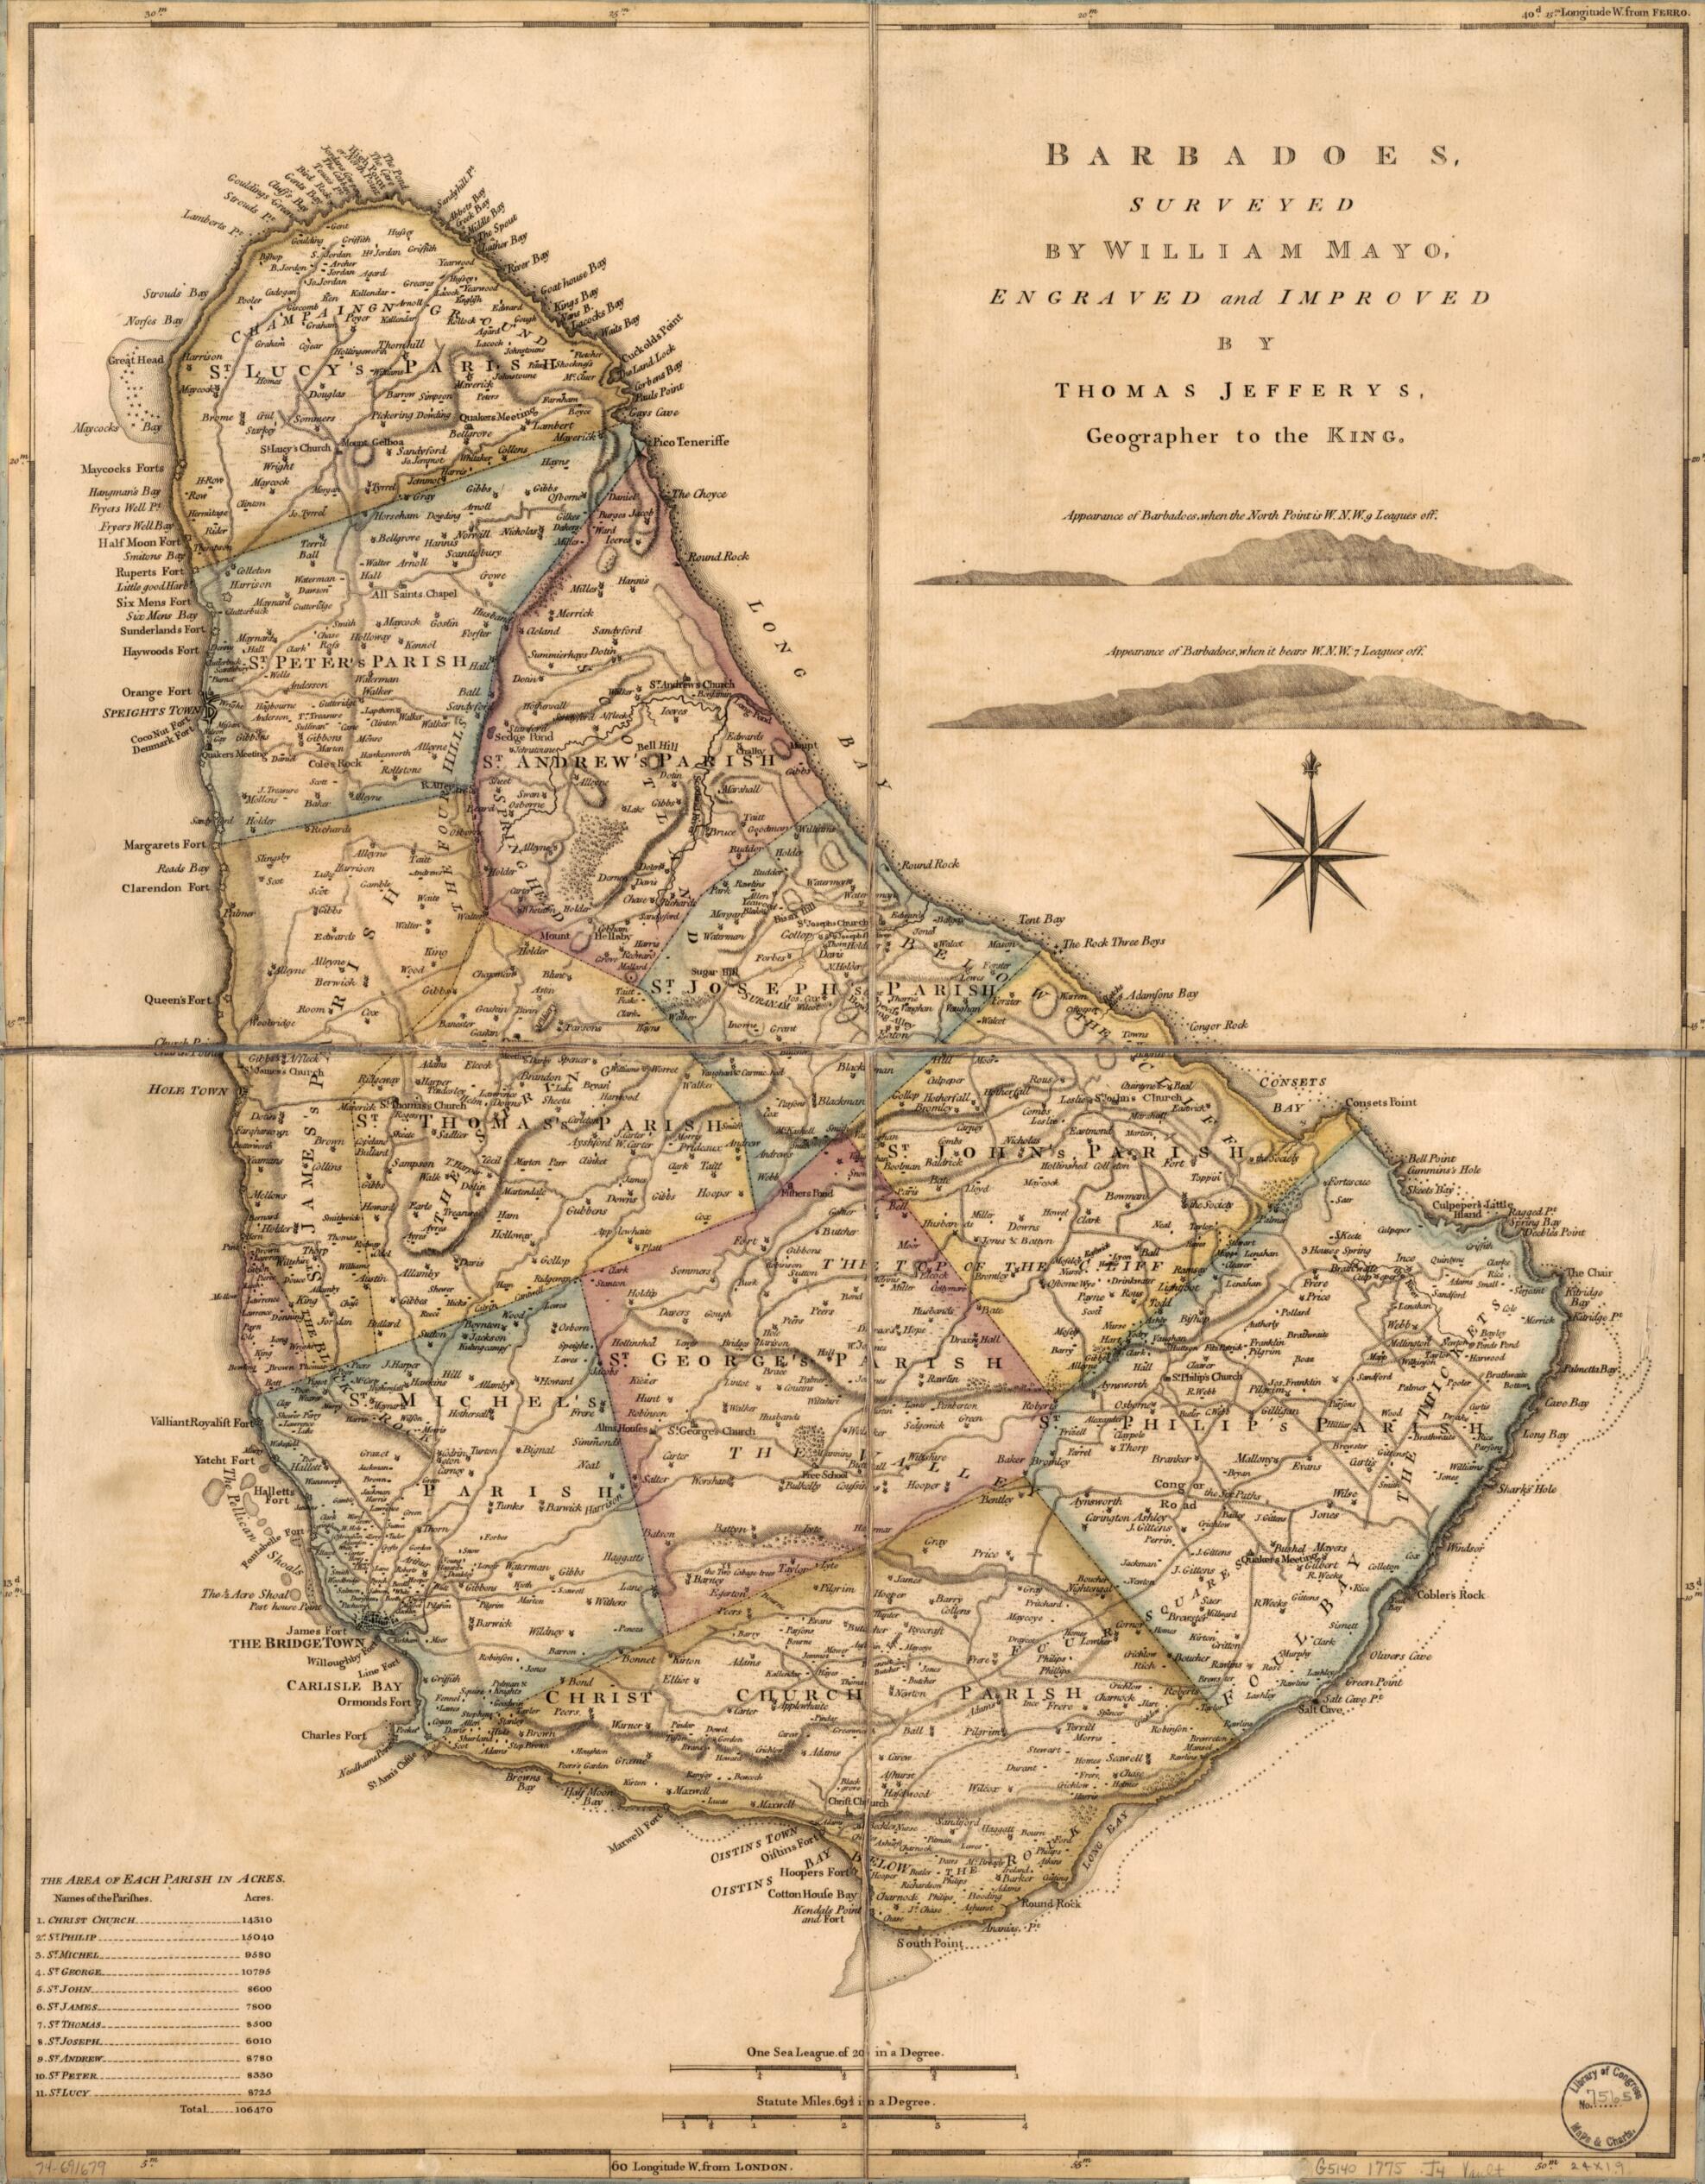 This old map of Barbadoes from 1775 was created by Thomas Jefferys, William Mayo in 1775